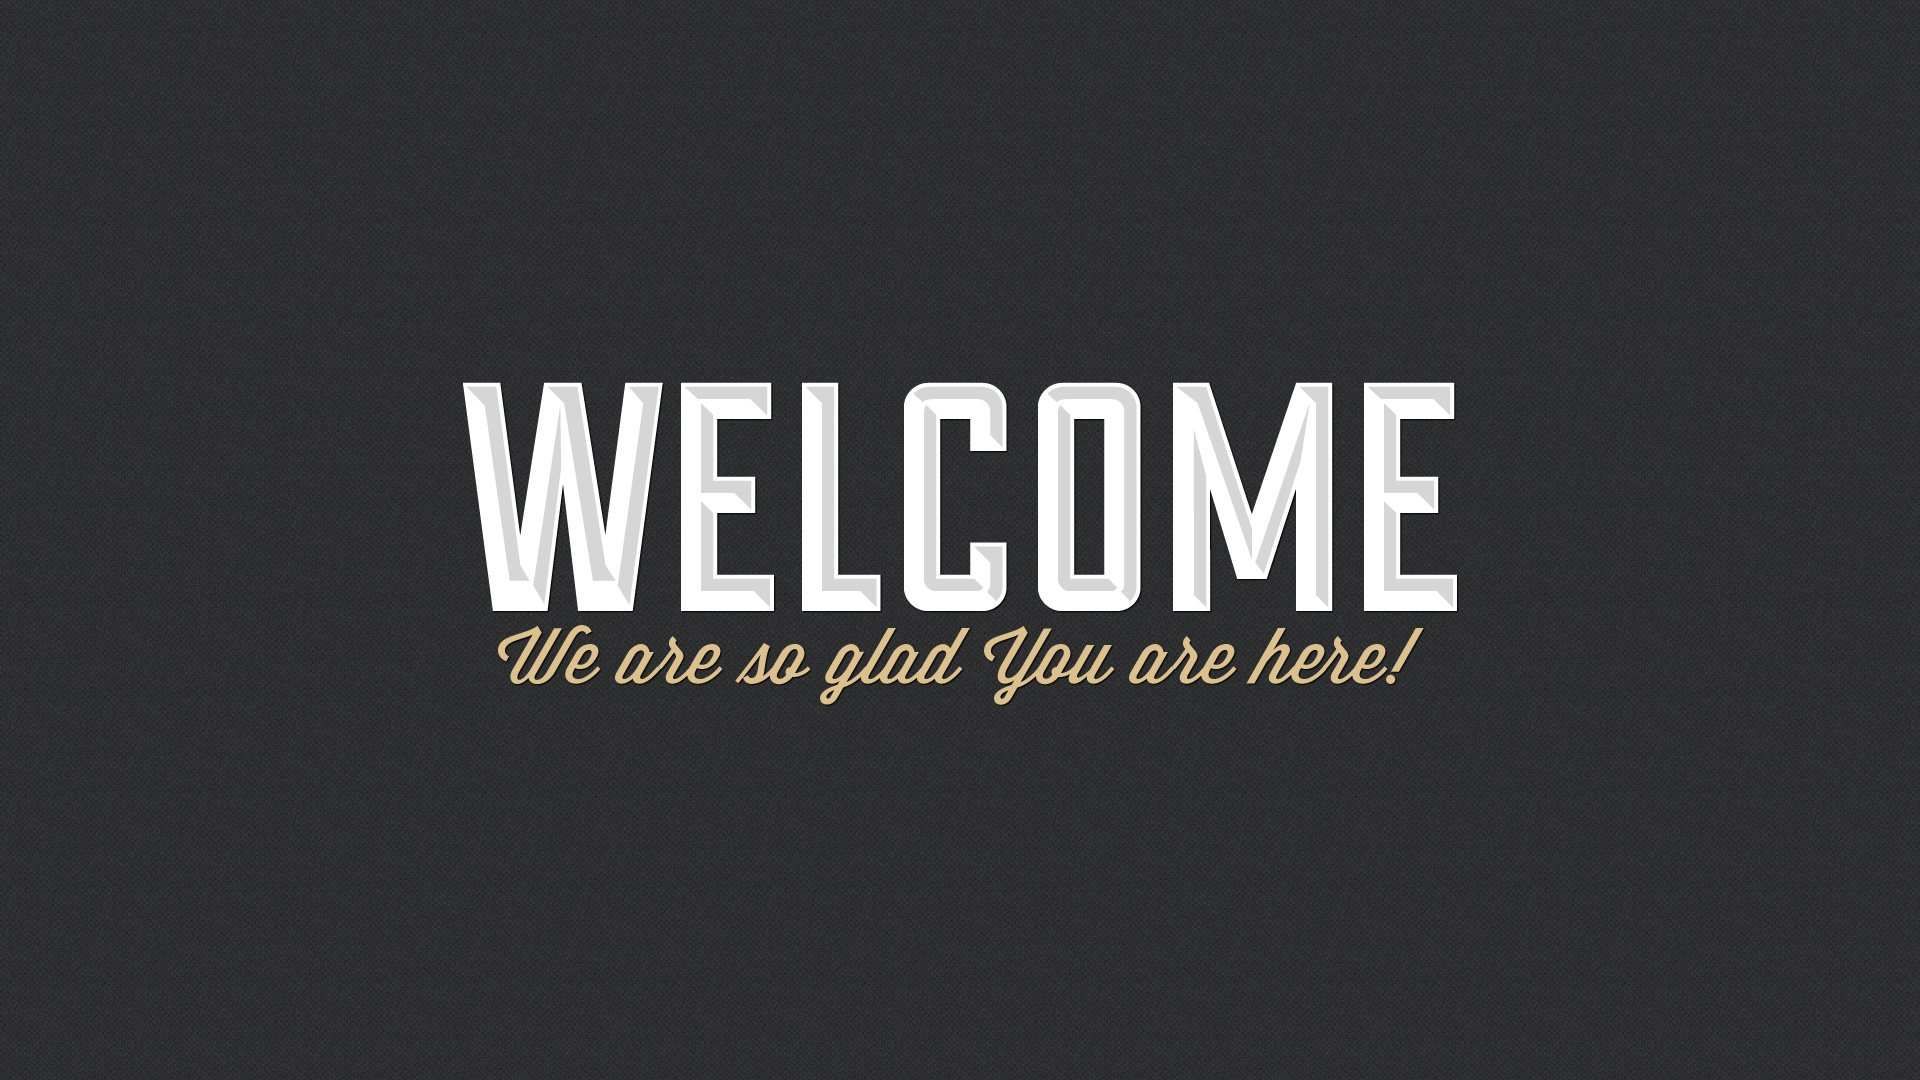 Wallpaper Of Welcome Image